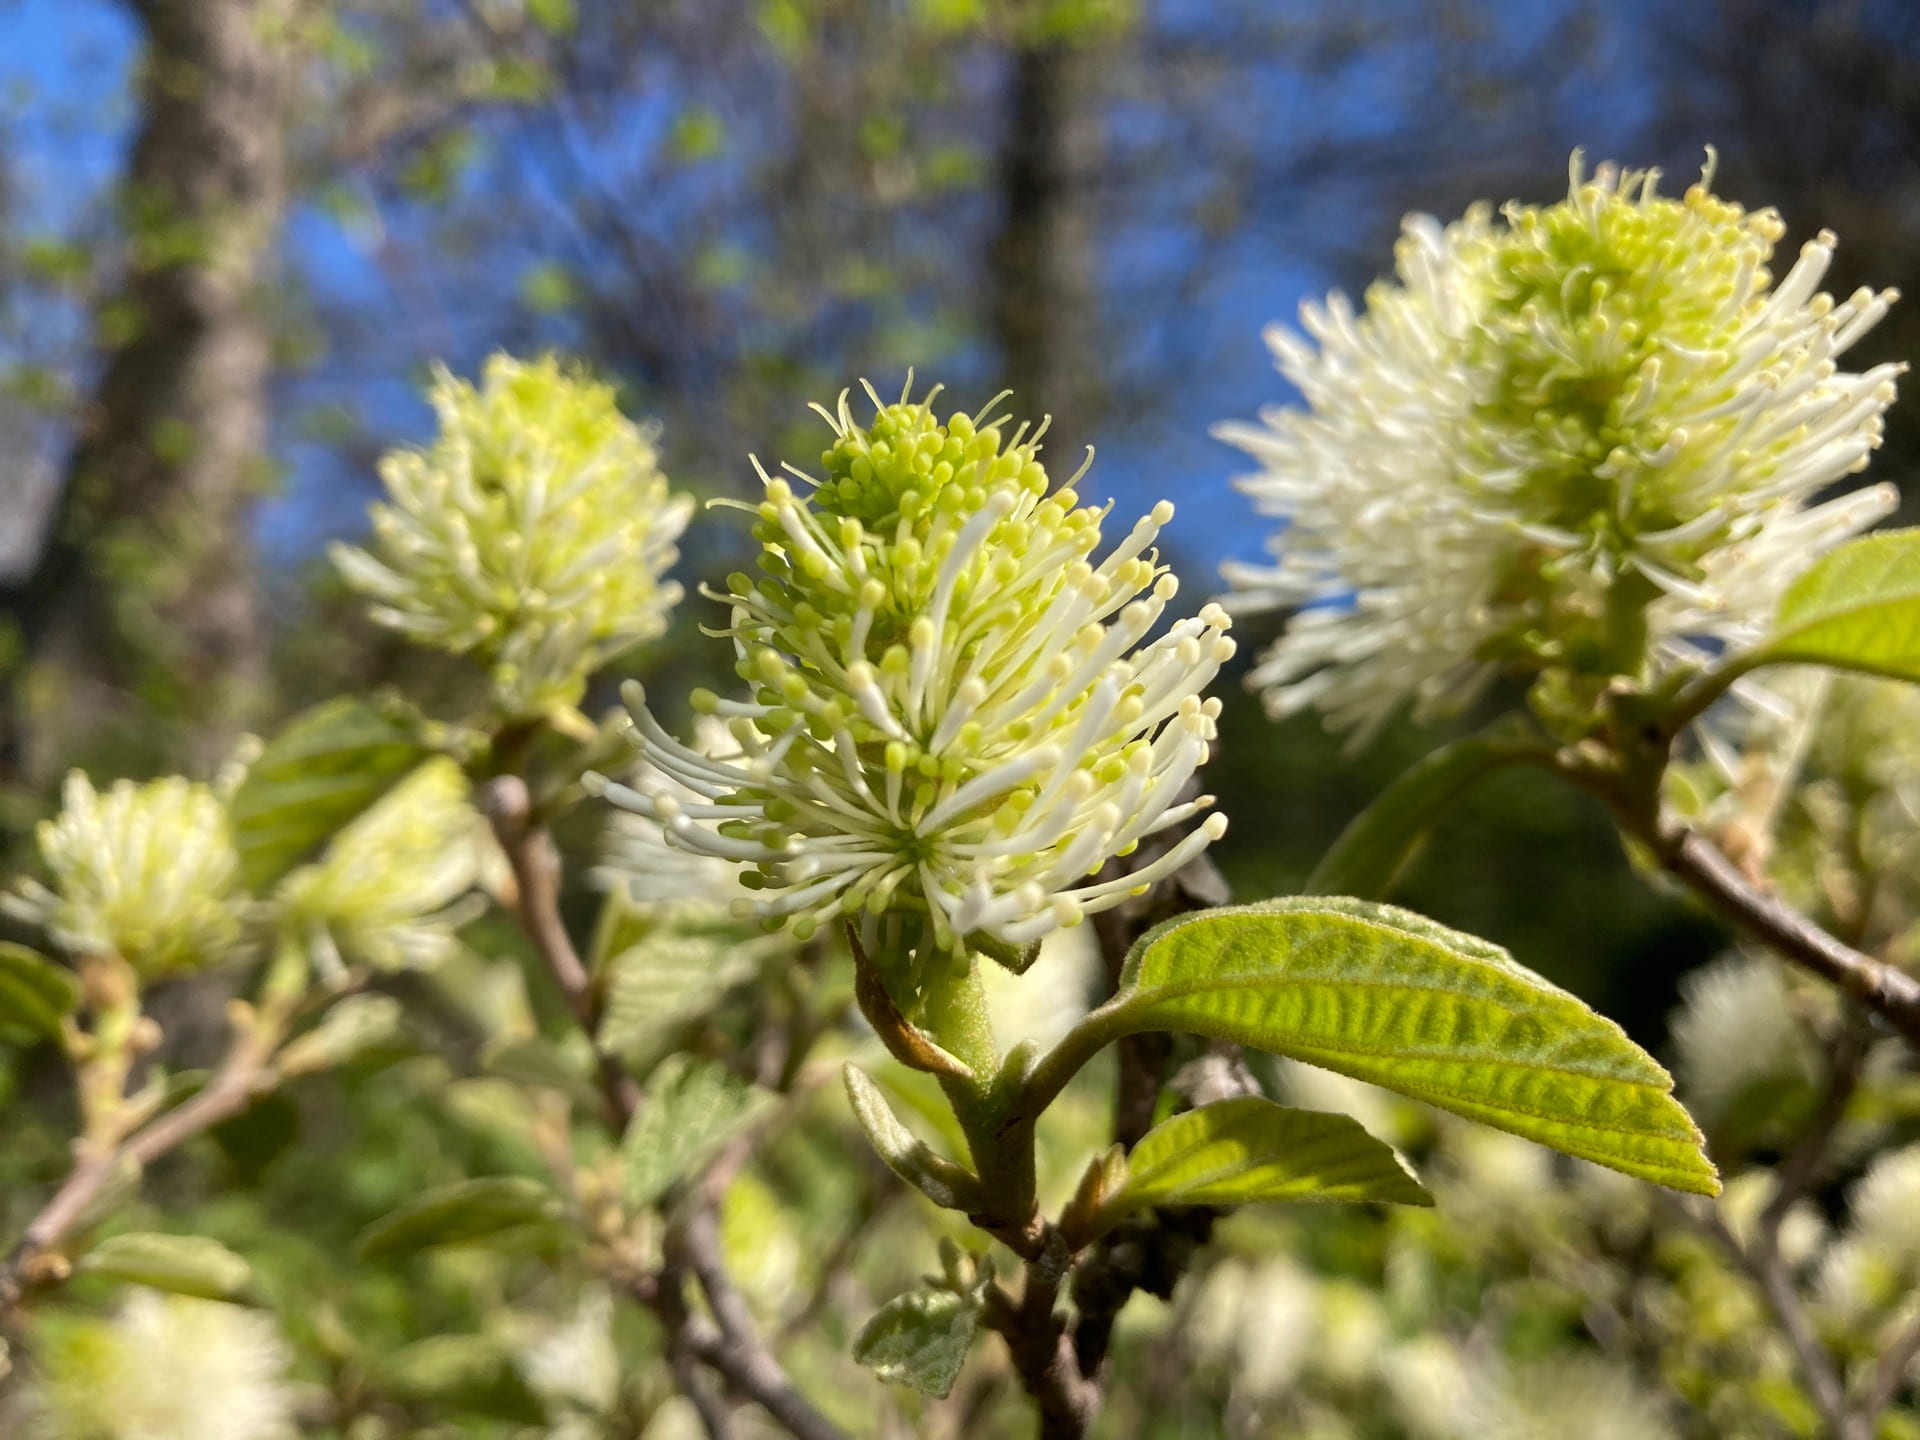 The unique bottlebrush flowers of Fothergilla major do not have any petals, but instead are entirely composed of reproductive parts.